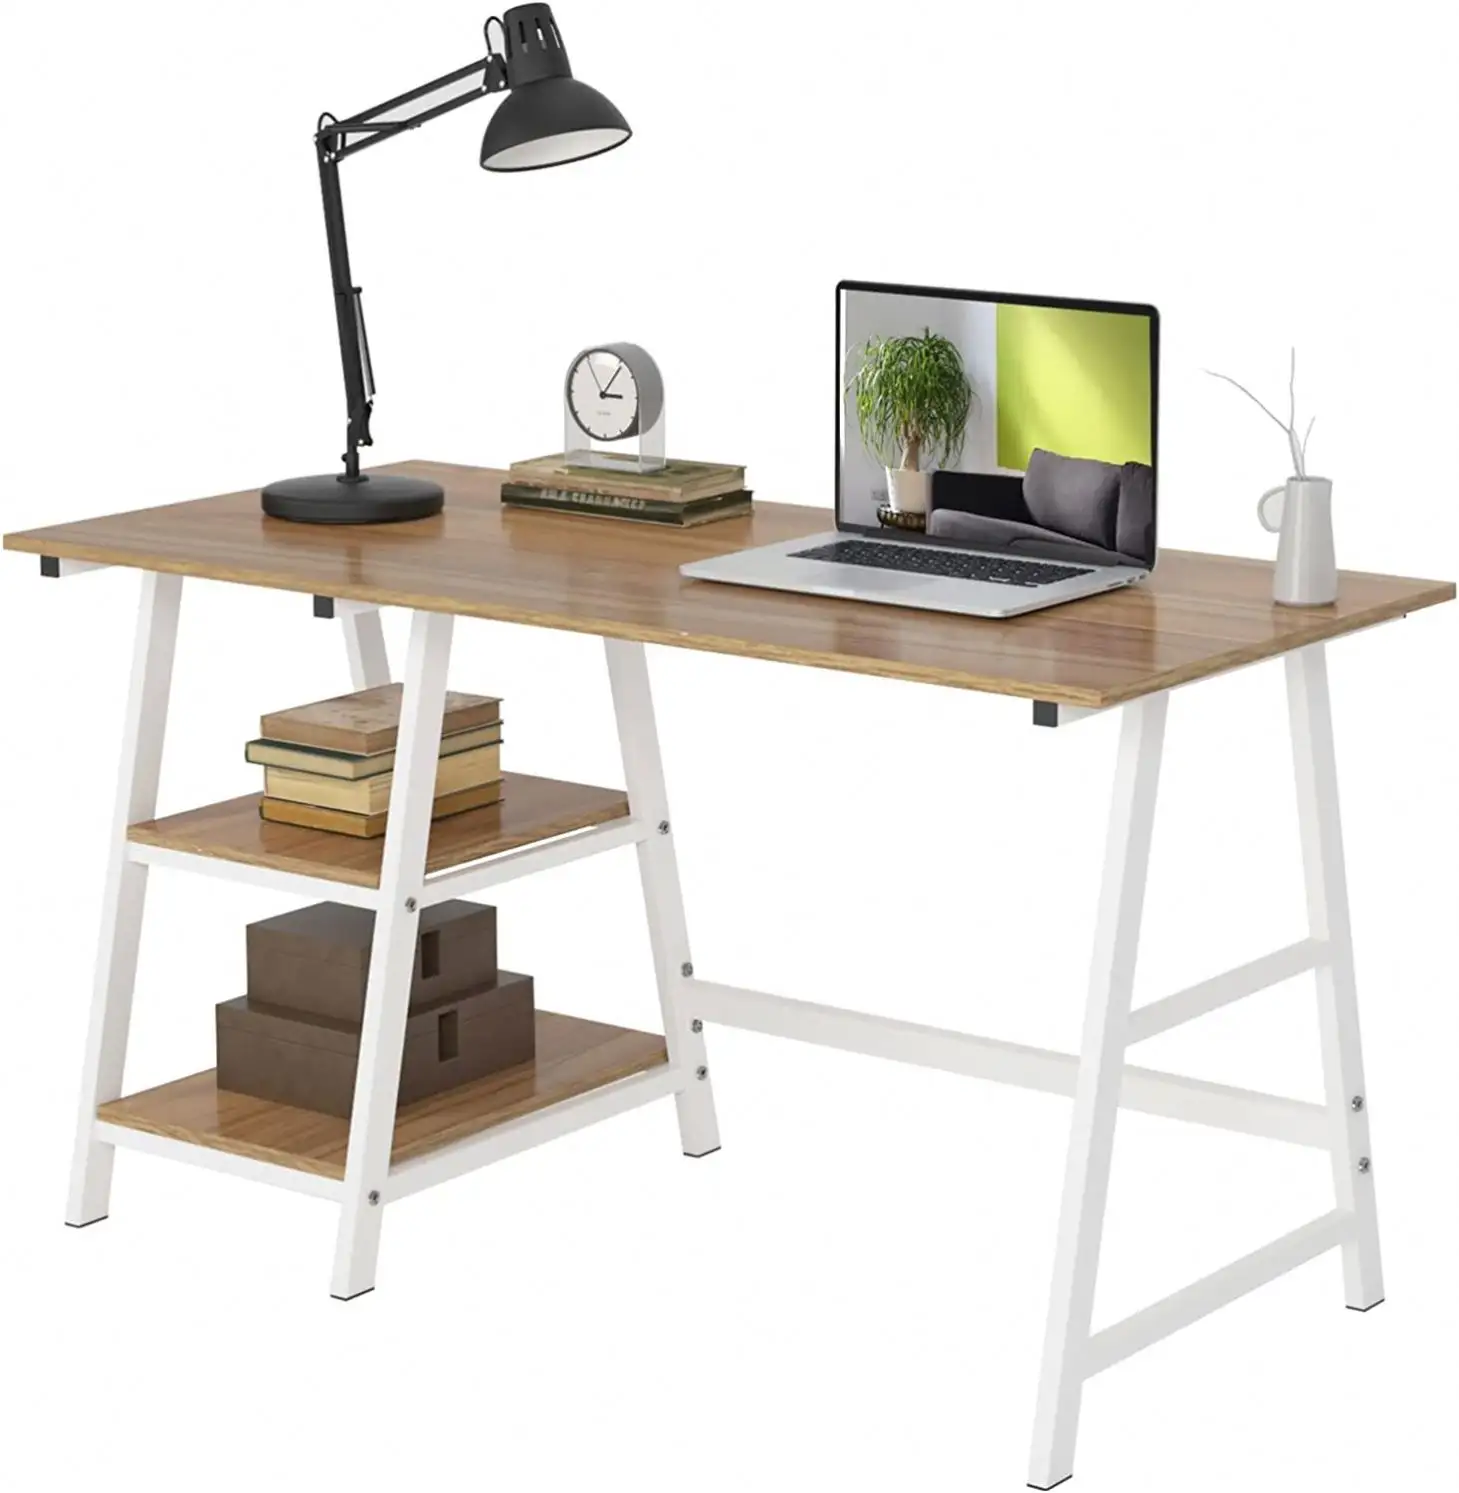 Factory Outlet Gamer Computer Table Gaming Desk For Home Office Modern Office Desk Sell At A Low Price